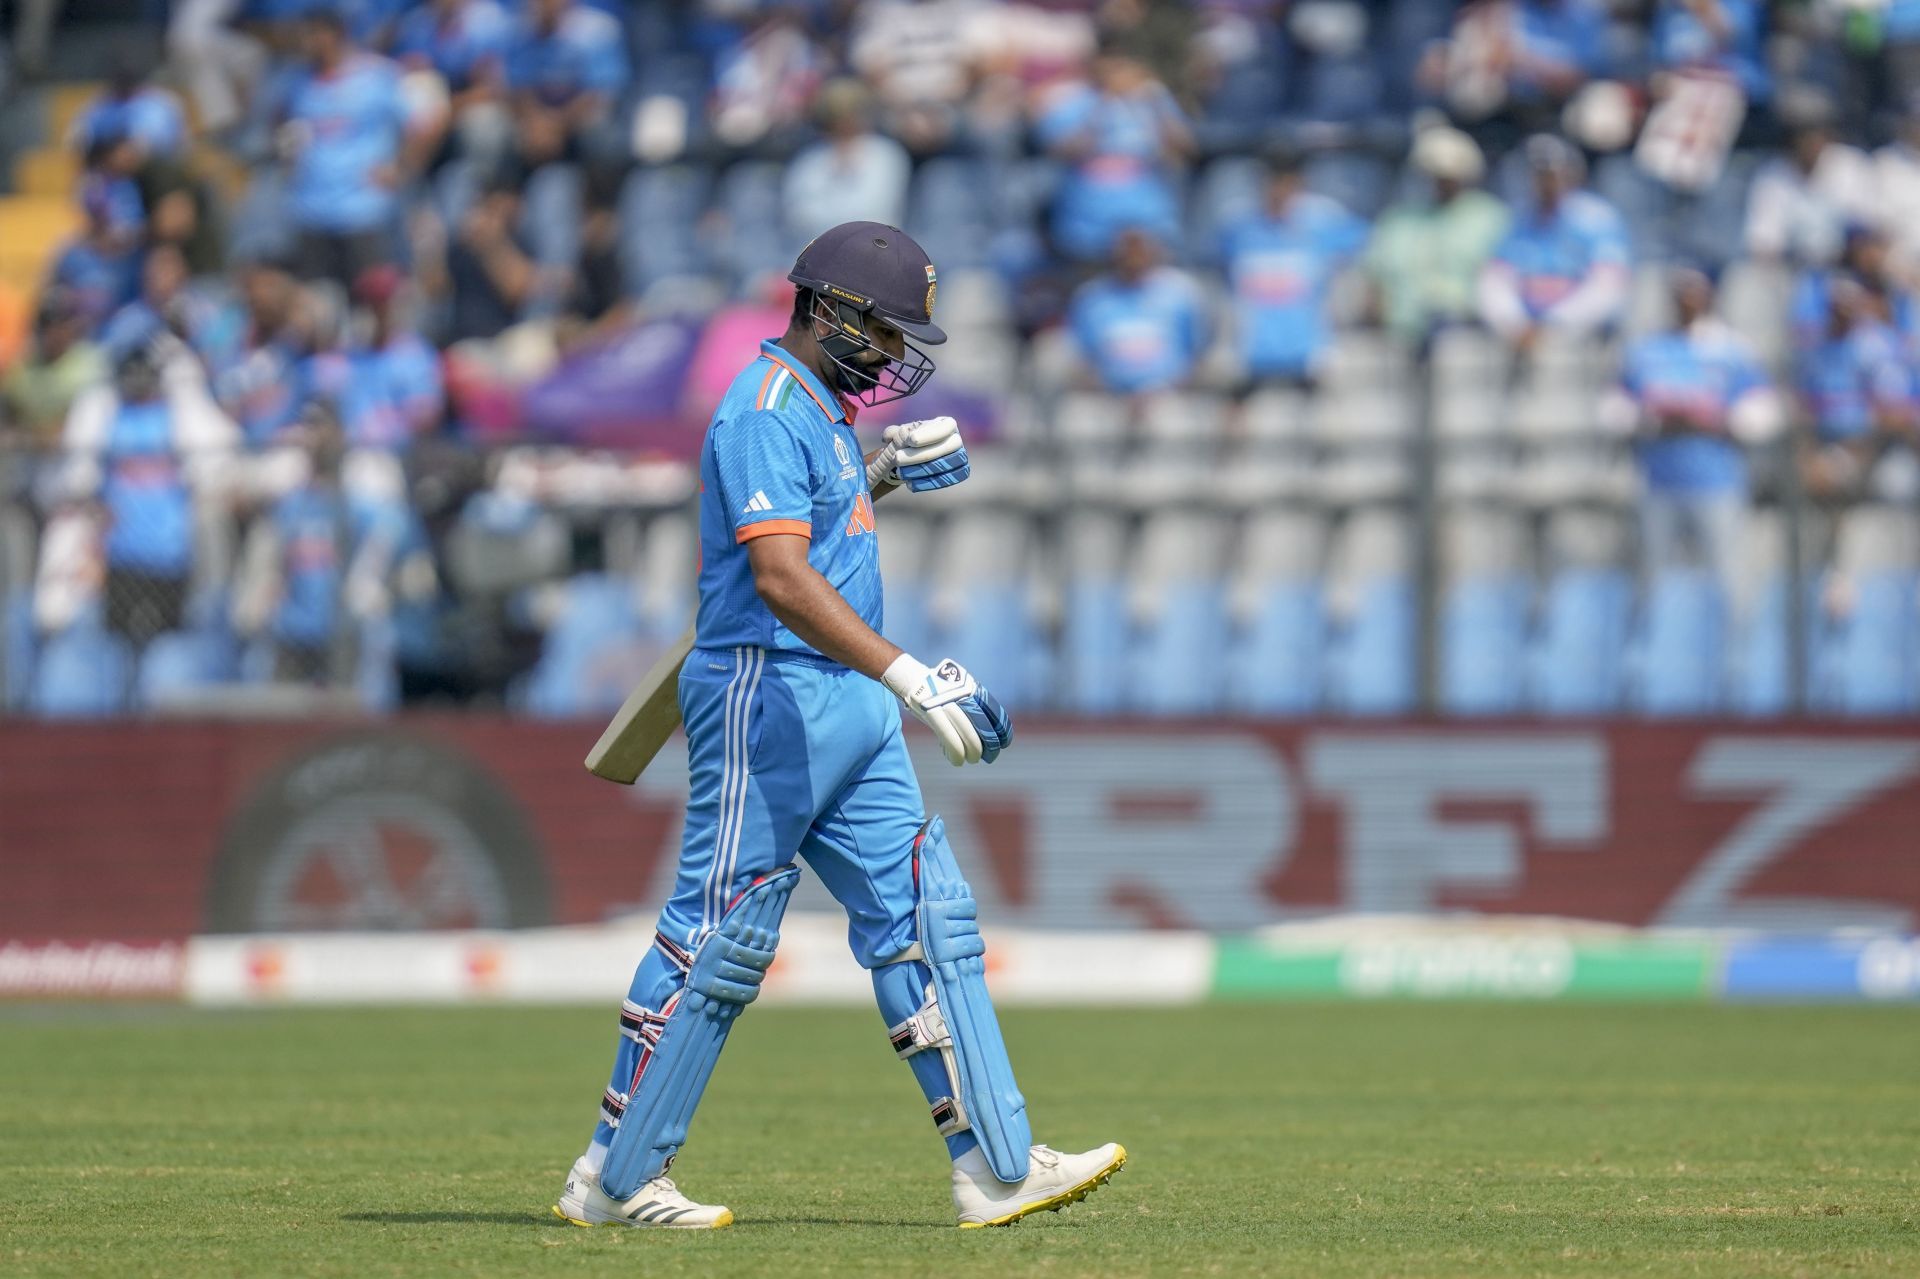 Rohit Sharma lasted just two balls in his hometown